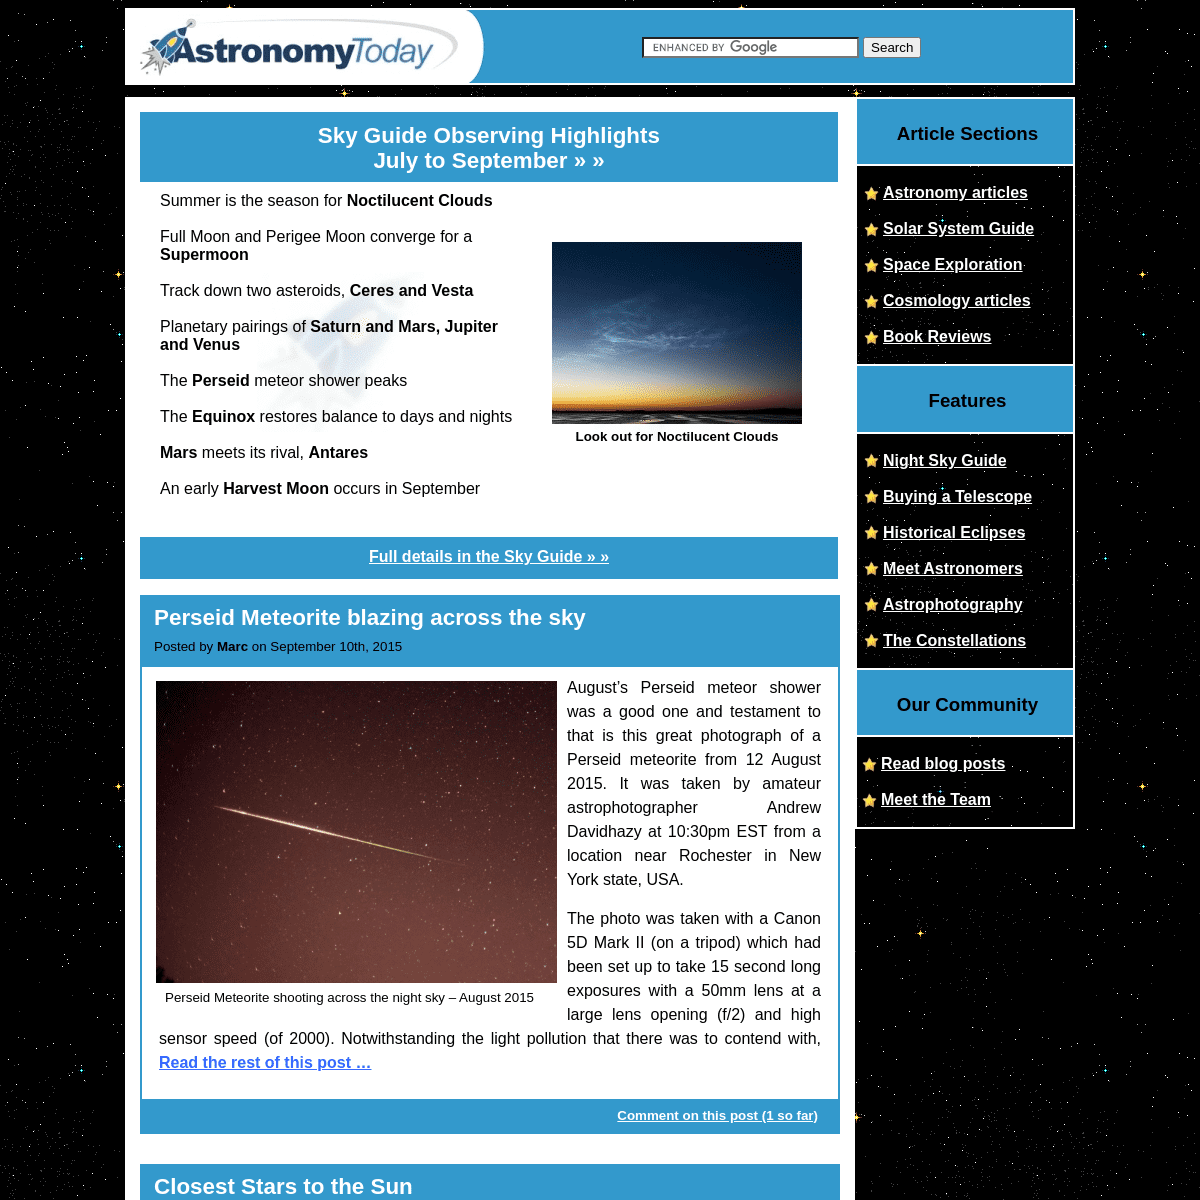 A complete backup of https://astronomytoday.com